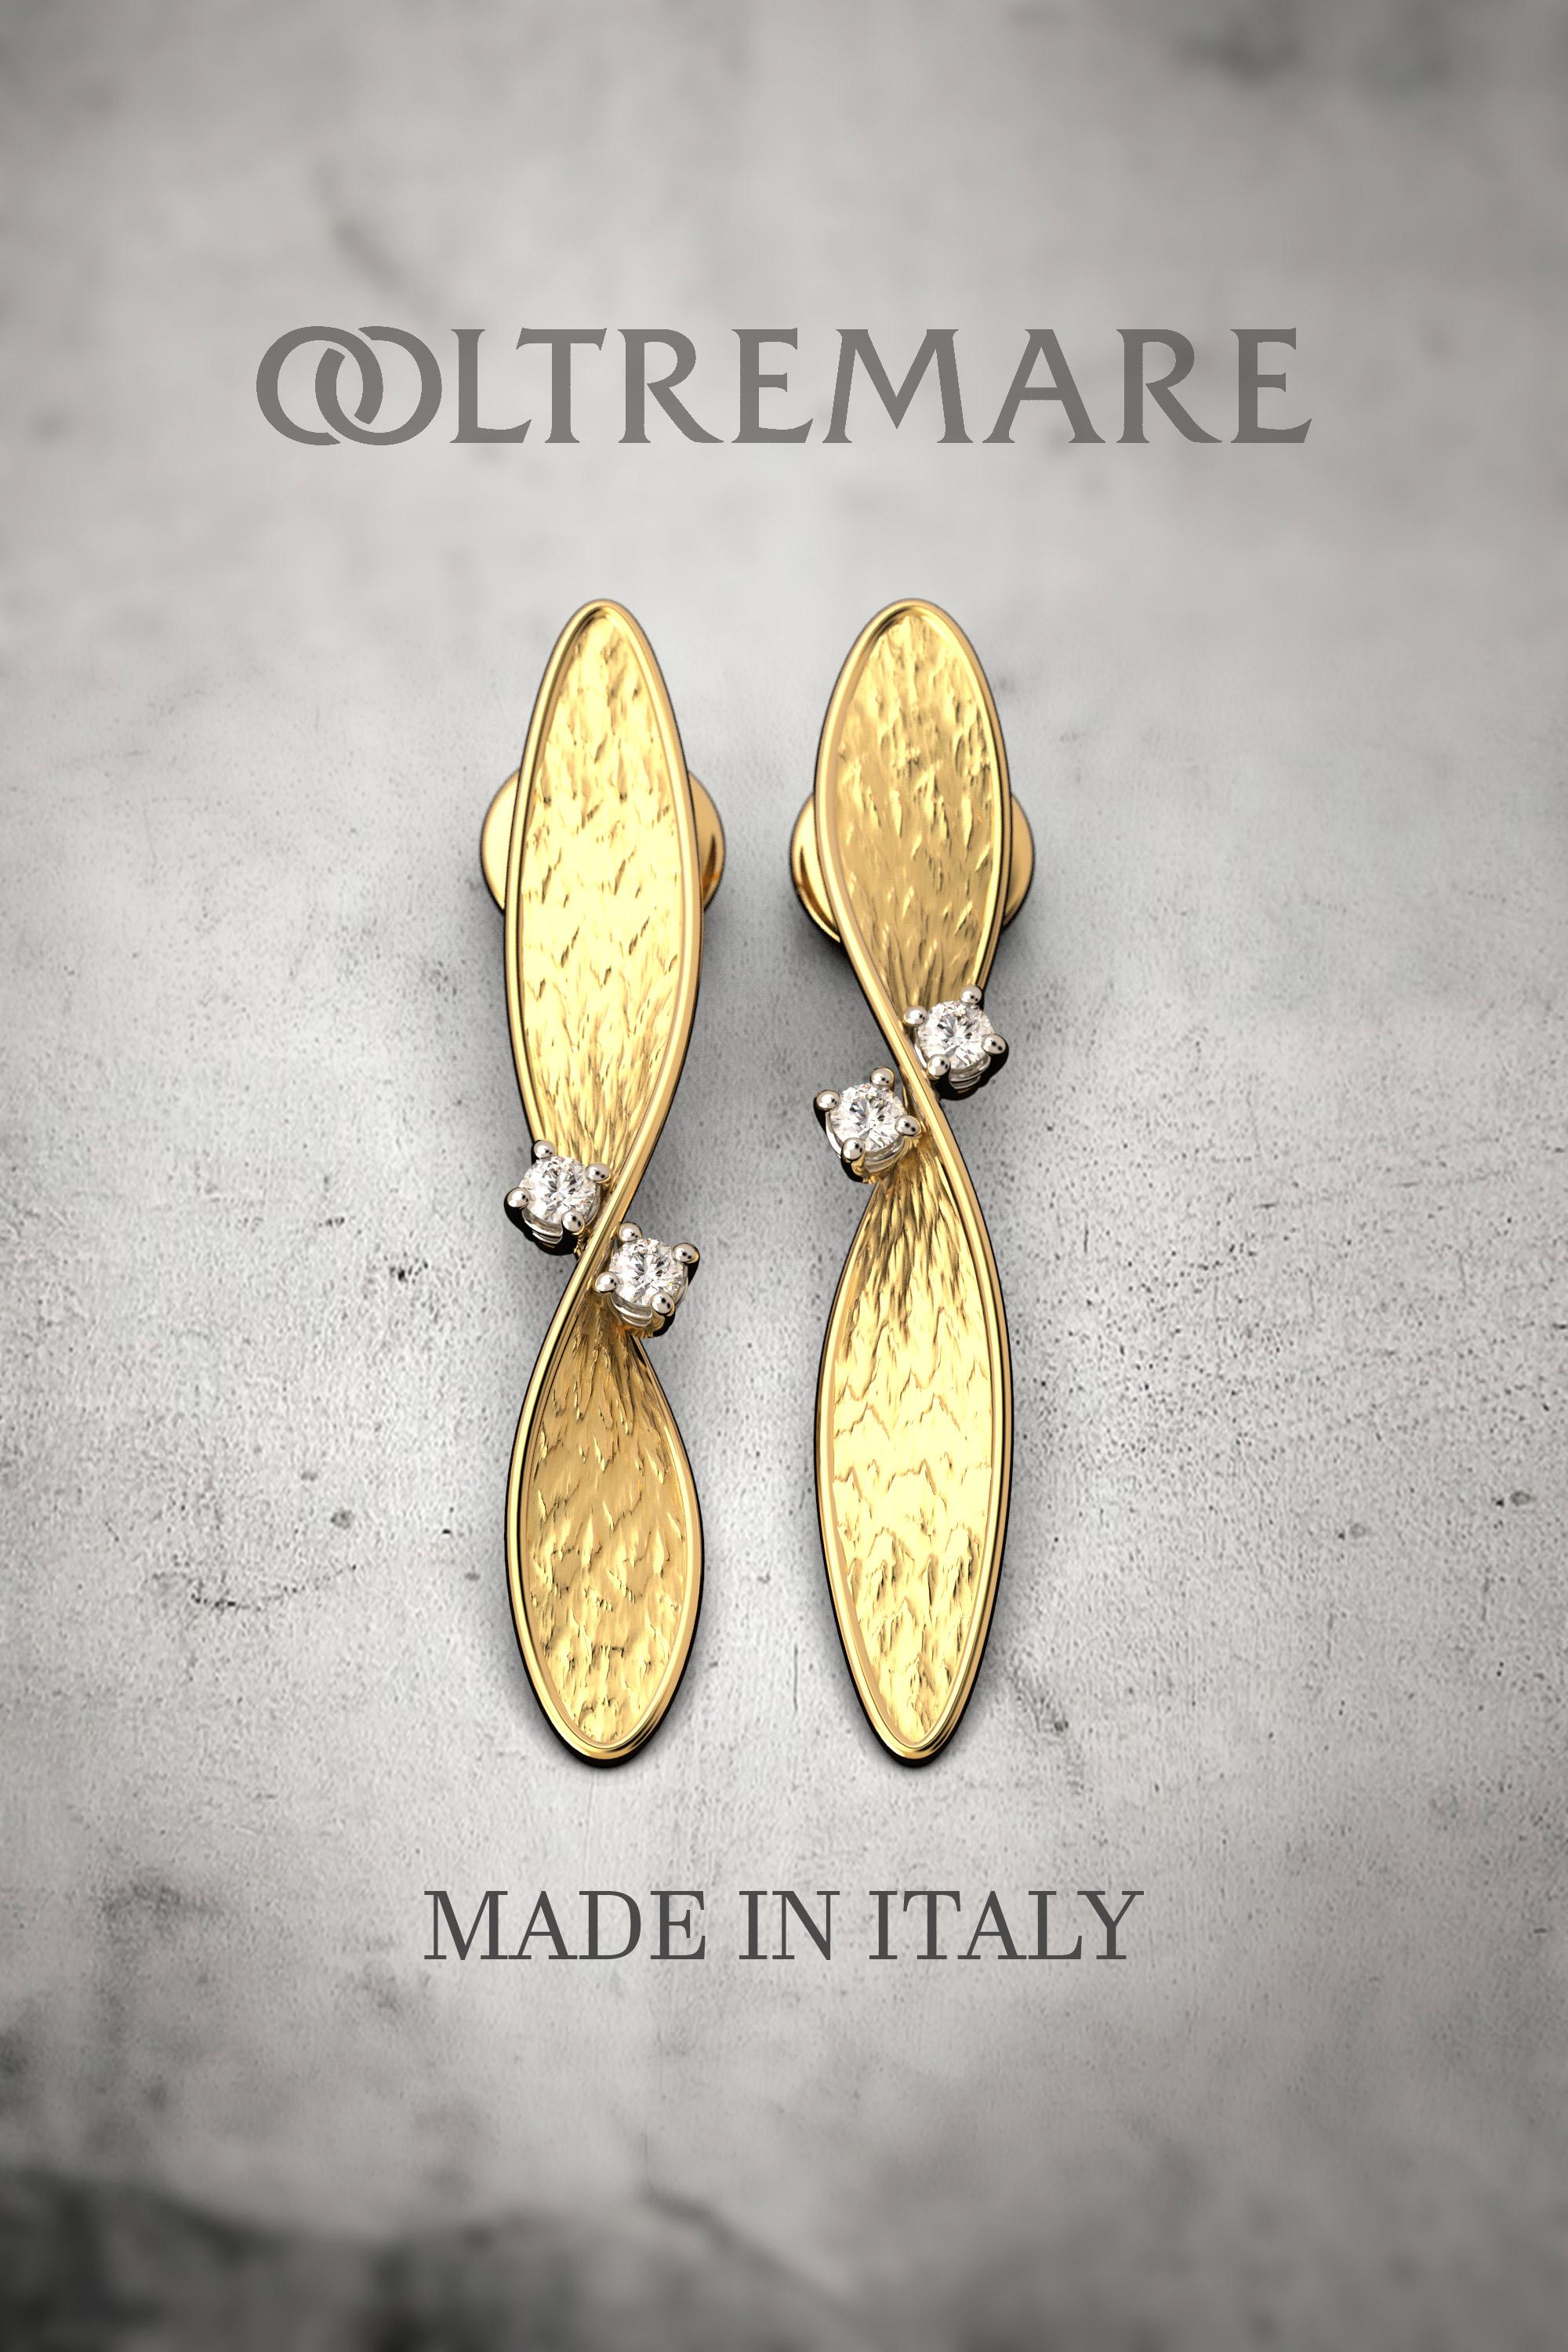 Made to order Modern Asymmetrical Gold Stud Earrings with natural diamonds
The jewels of the Polvere collection are born from a material idea in which modern and fluid surfaces are covered with gold dust, play with the raw and powdery brightness of